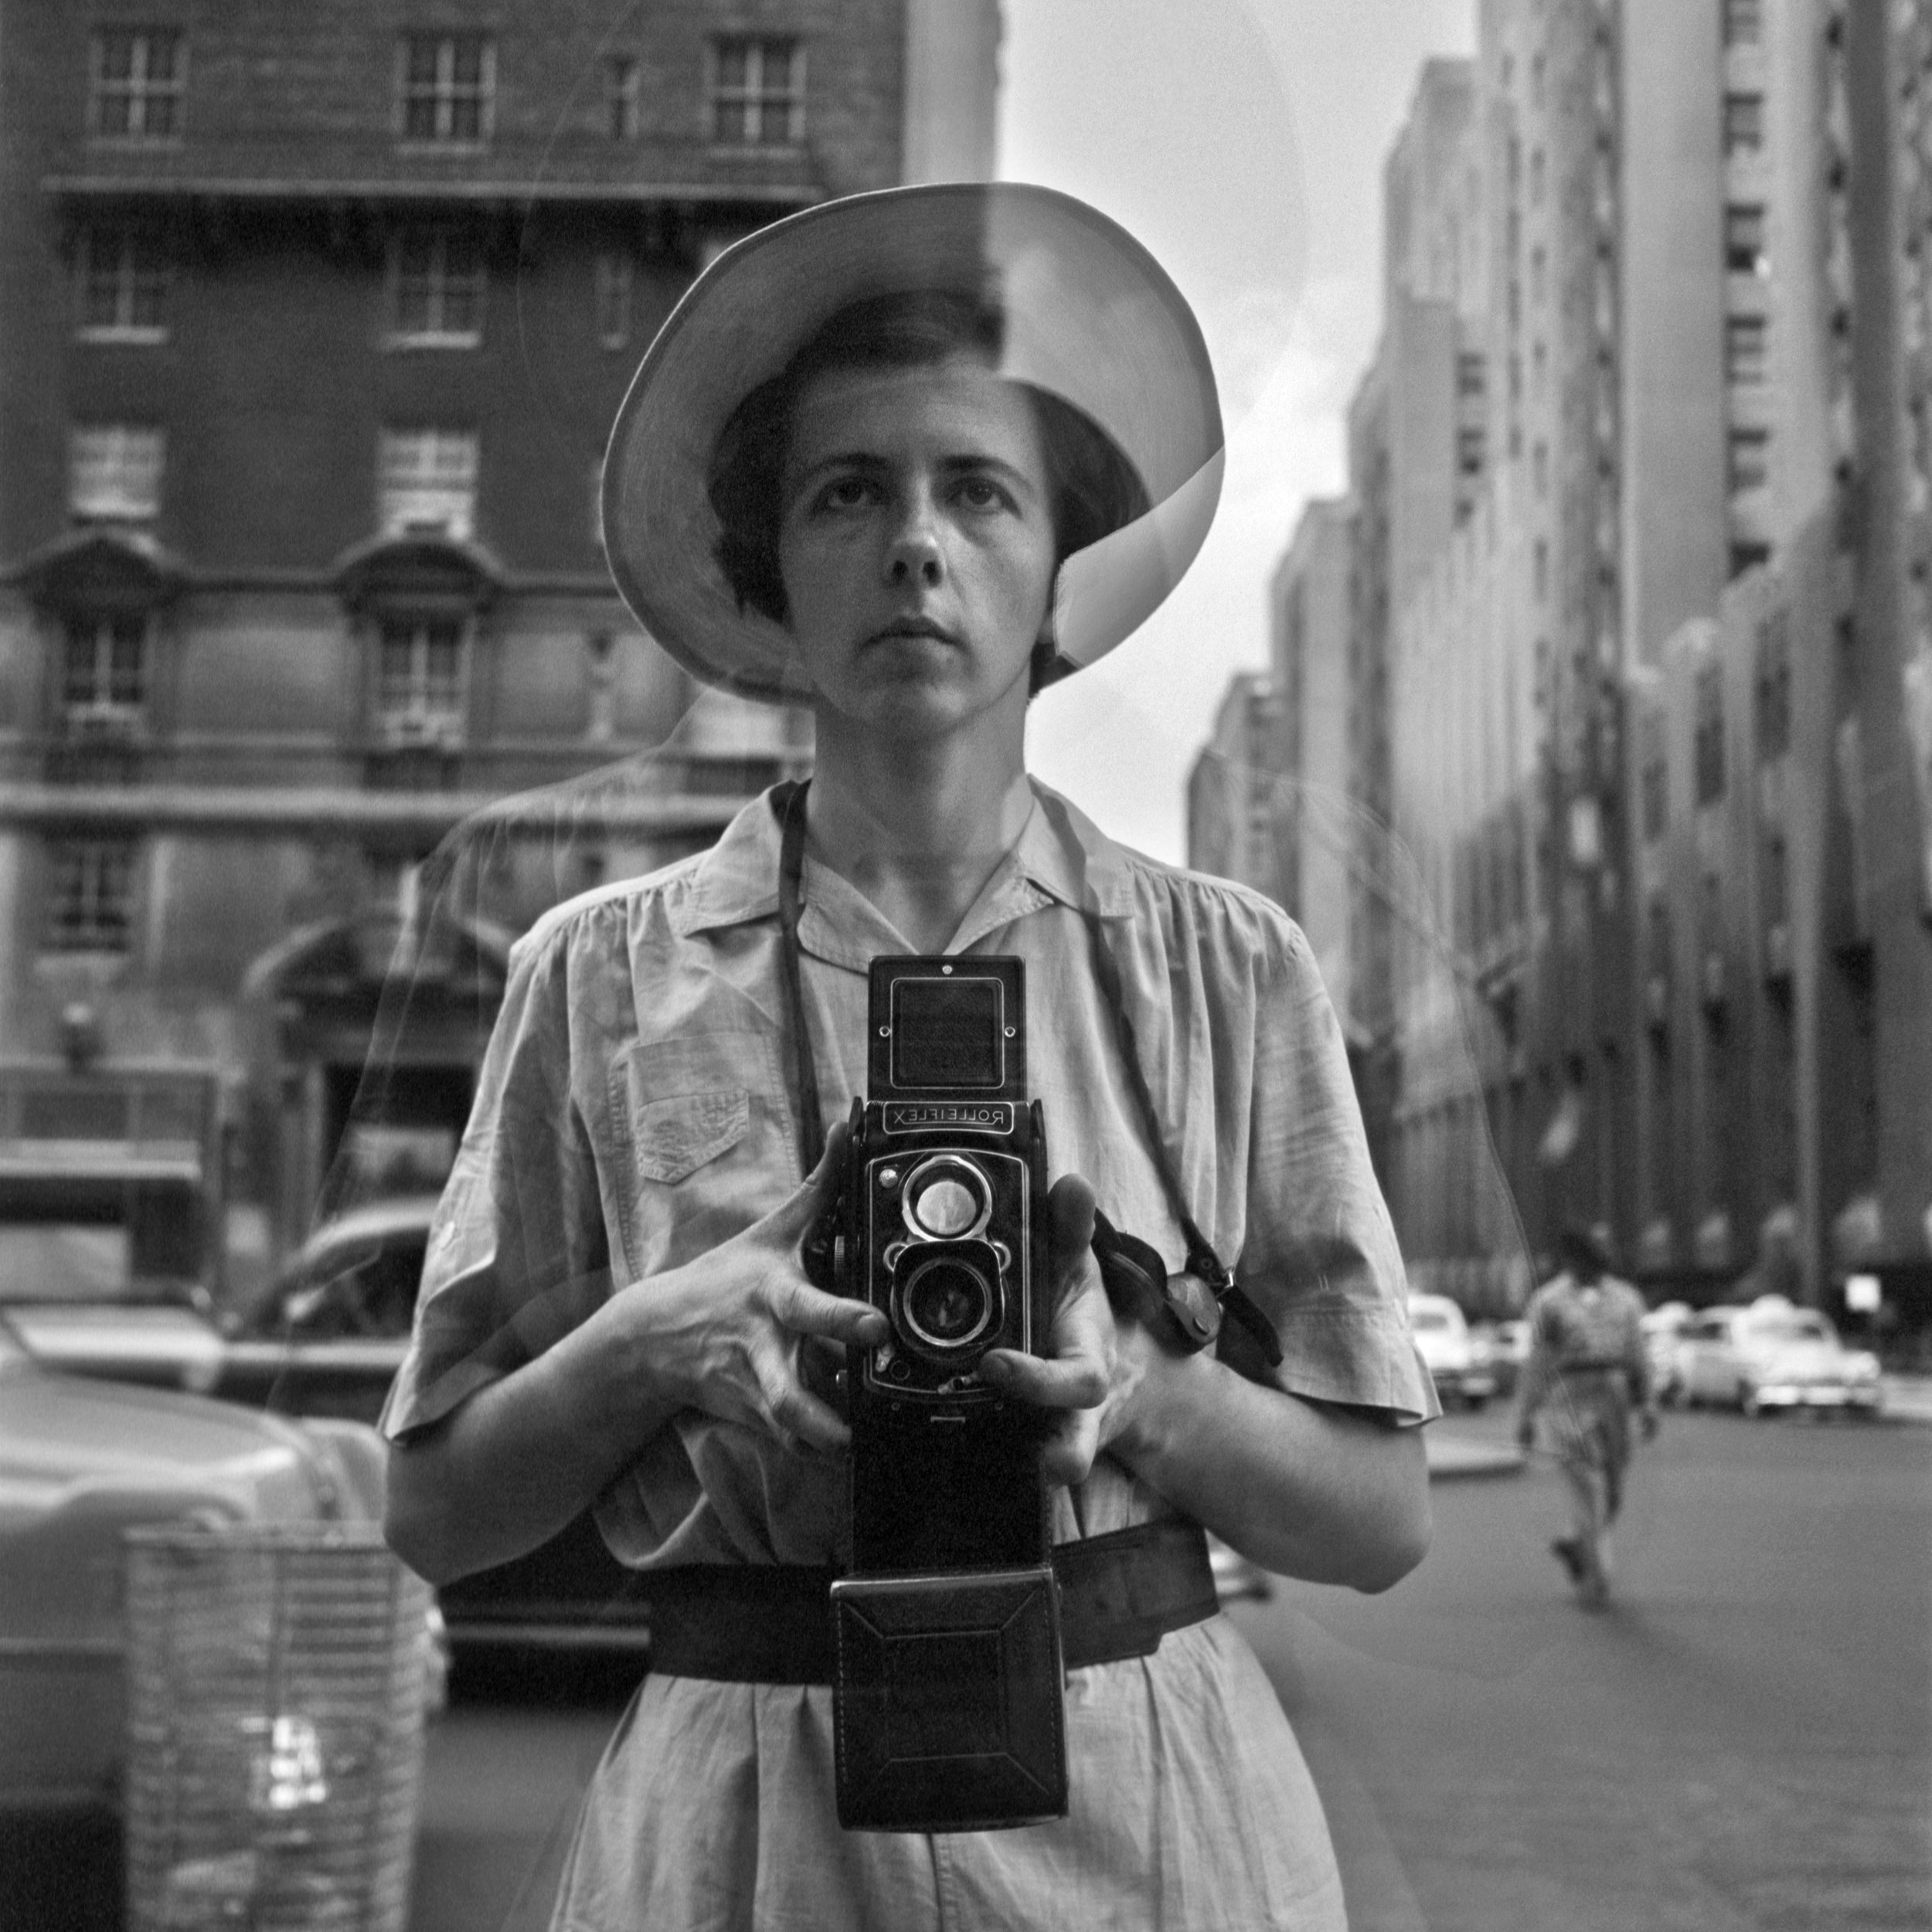 Credit_Estate of Vivian Maier, Courtesy of Maloof Collection and Howard Greenberg Gallery, NY_Haus_der_Fotografie_Vivian_Maier_Self_Portrait_NewYork_1954.jpg